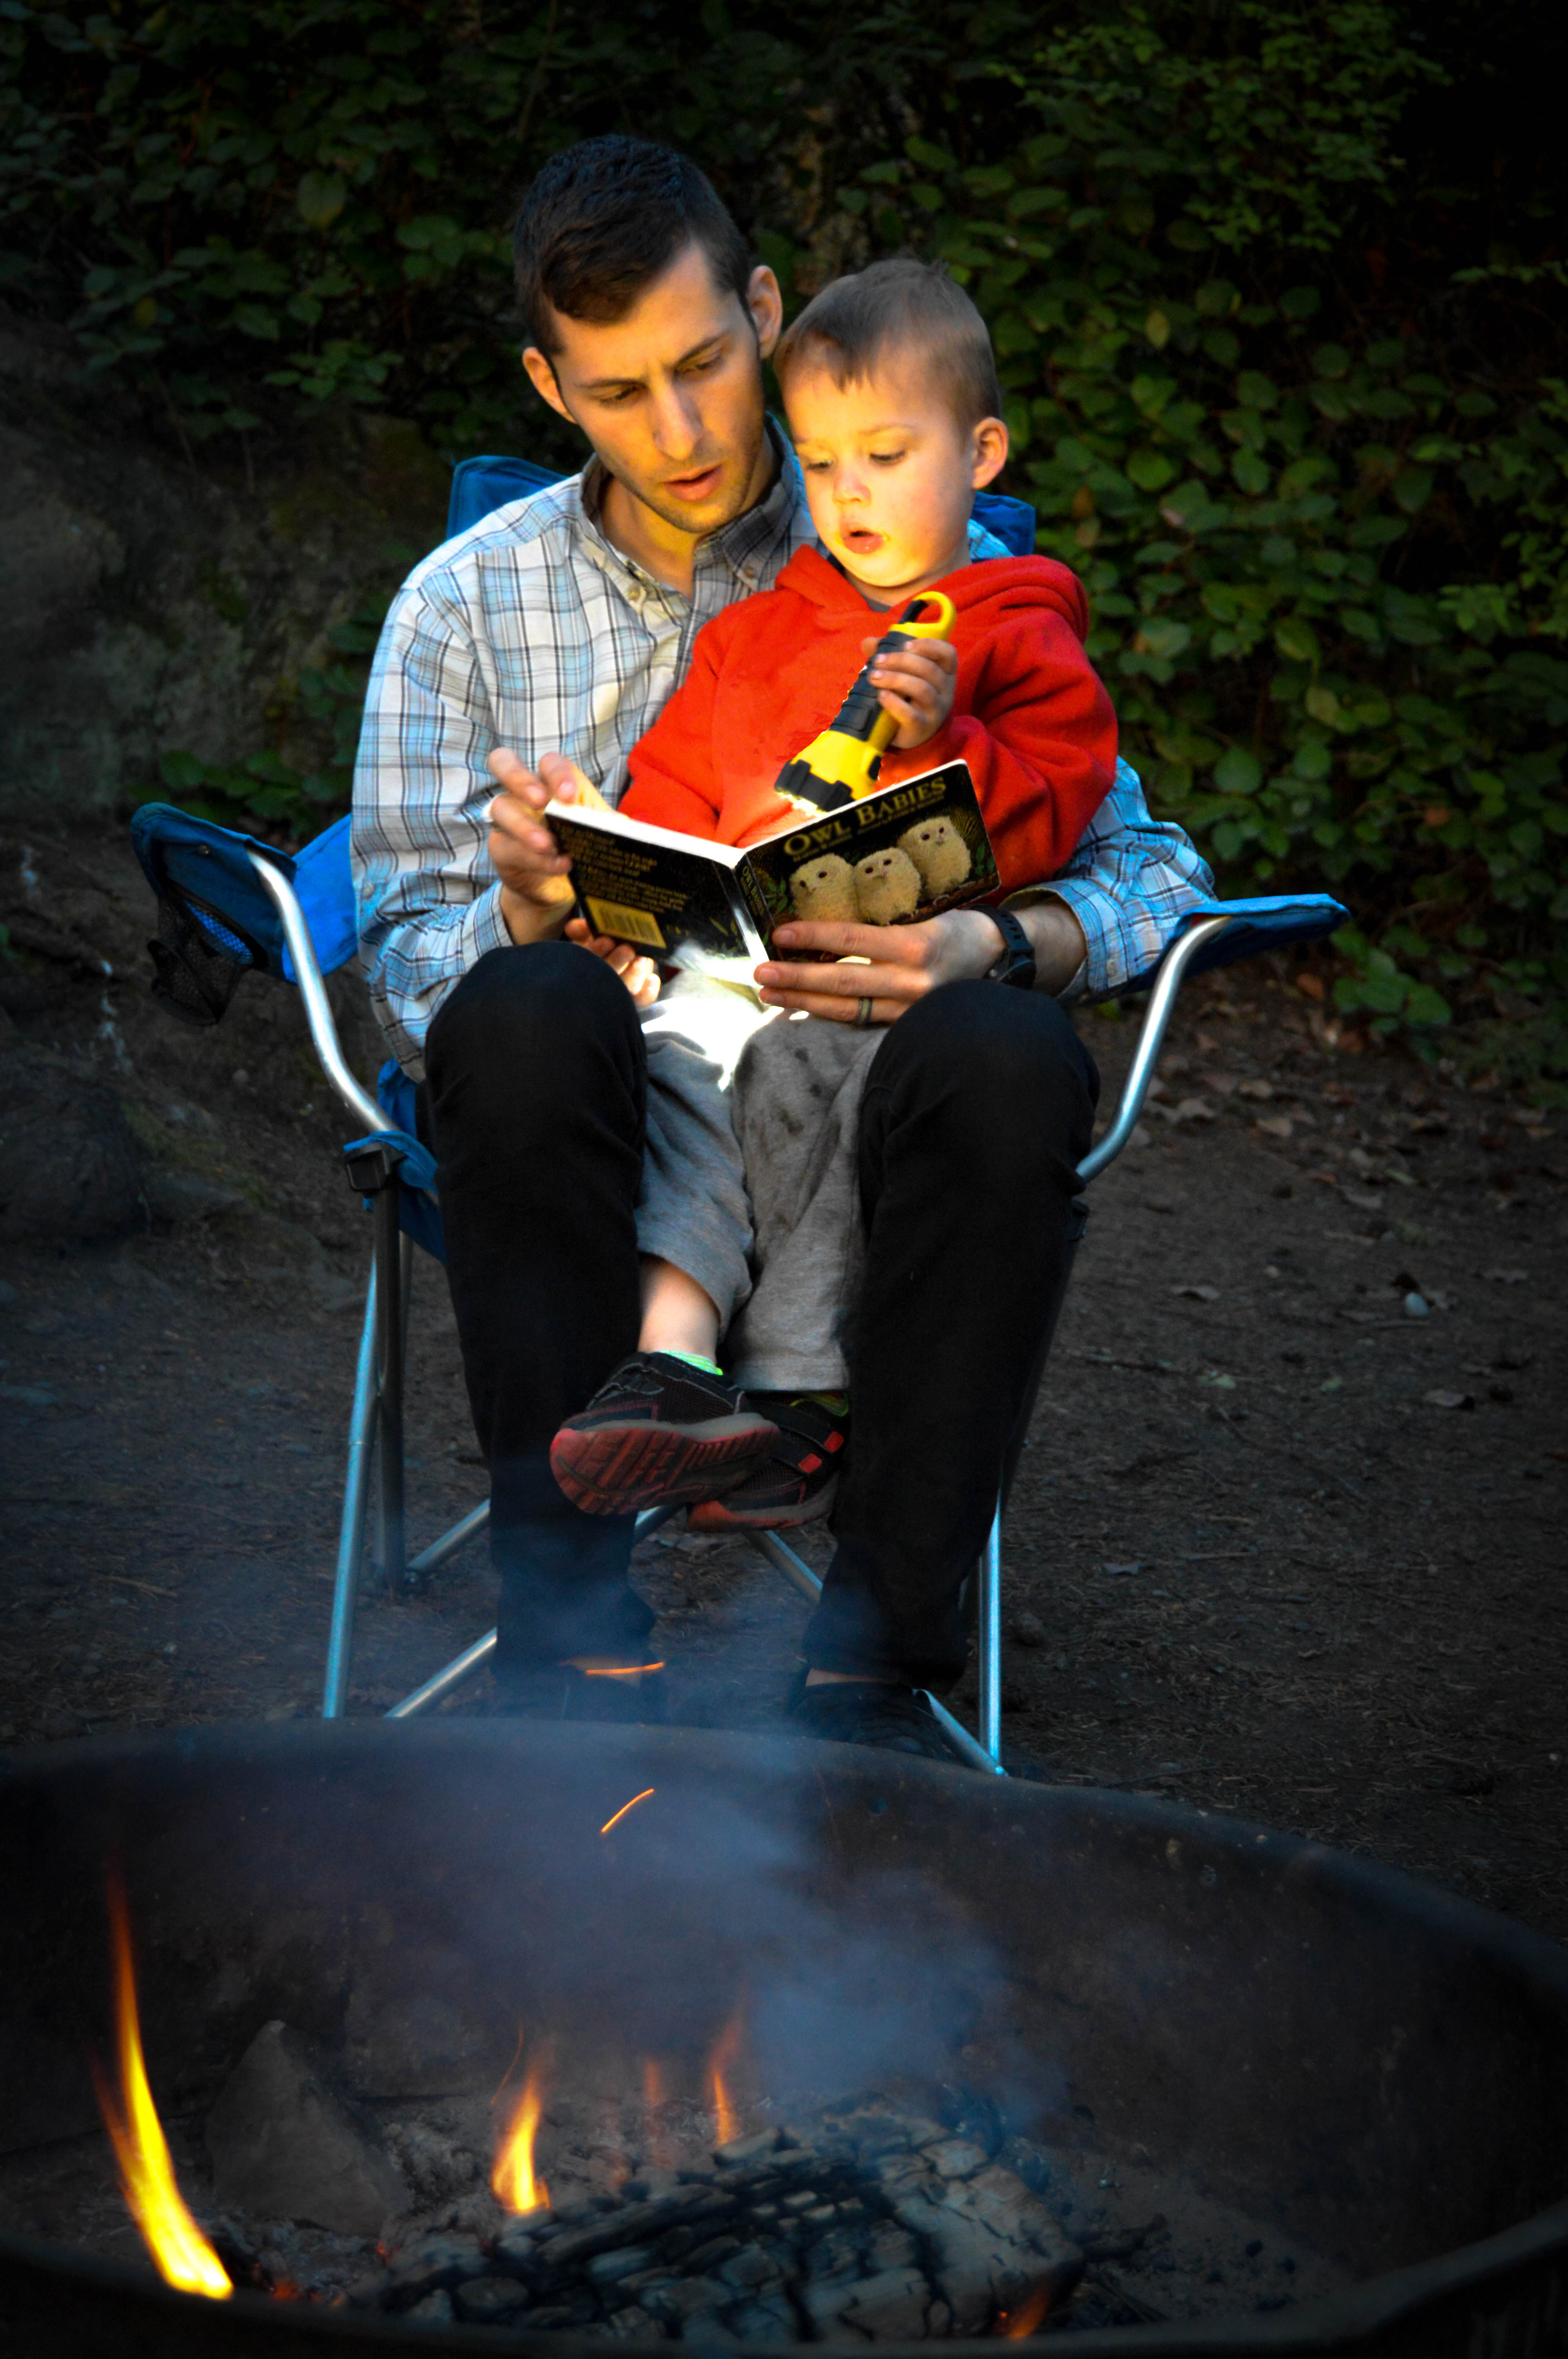 Fun Camping Activities for Toddlers #1 - Read books by flashlight